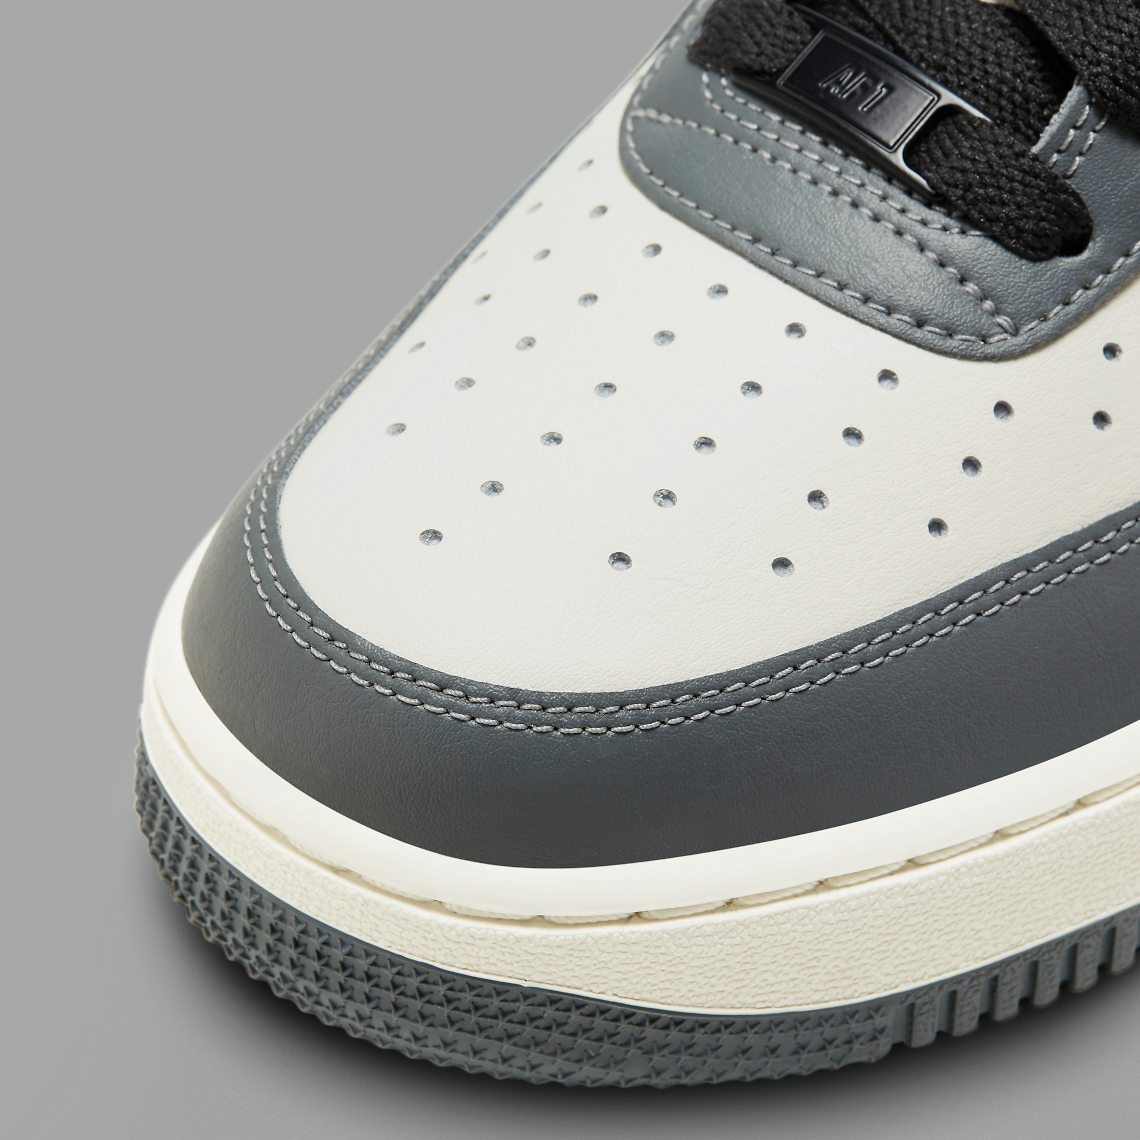 Nike nike air force 1 grey cement board price india Low Fd9063 100 5